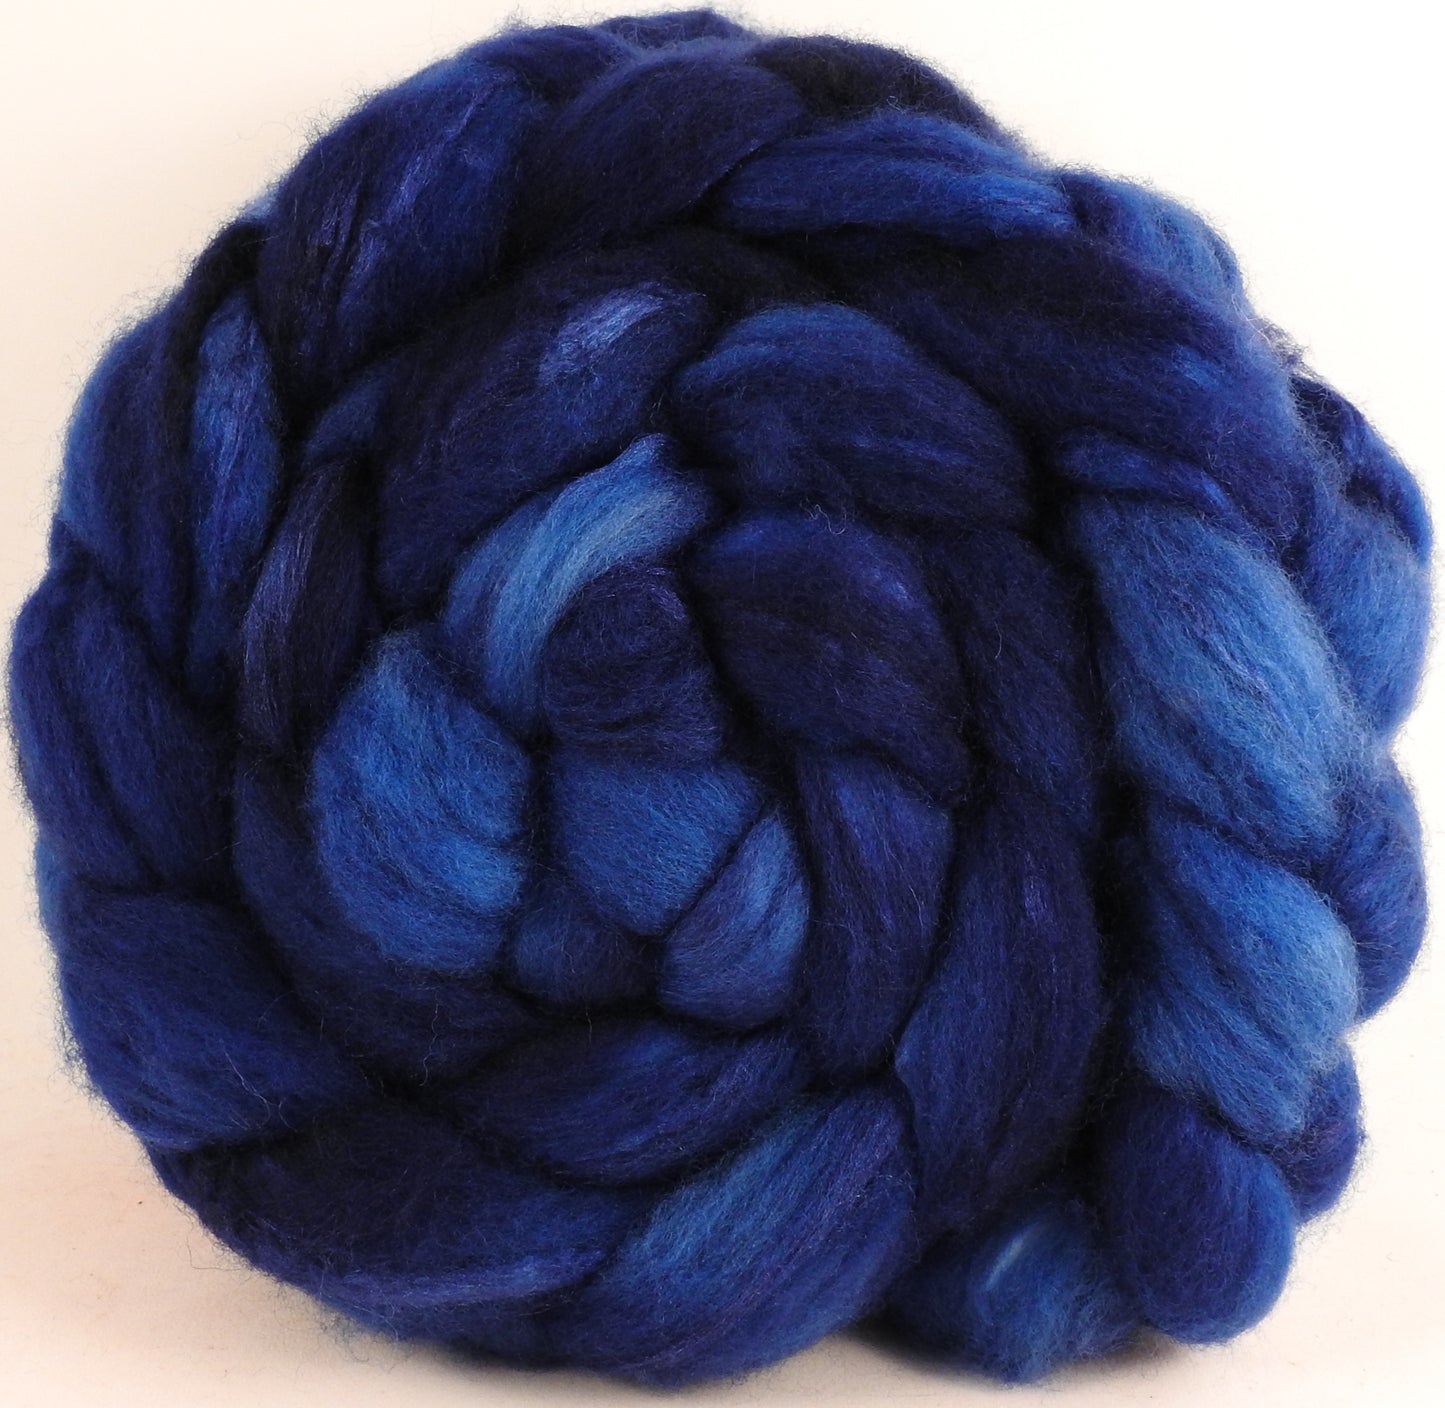 Blue-faced Leicester/ Tussah Silk (70/30) - Lights Out - (5.4 oz.)